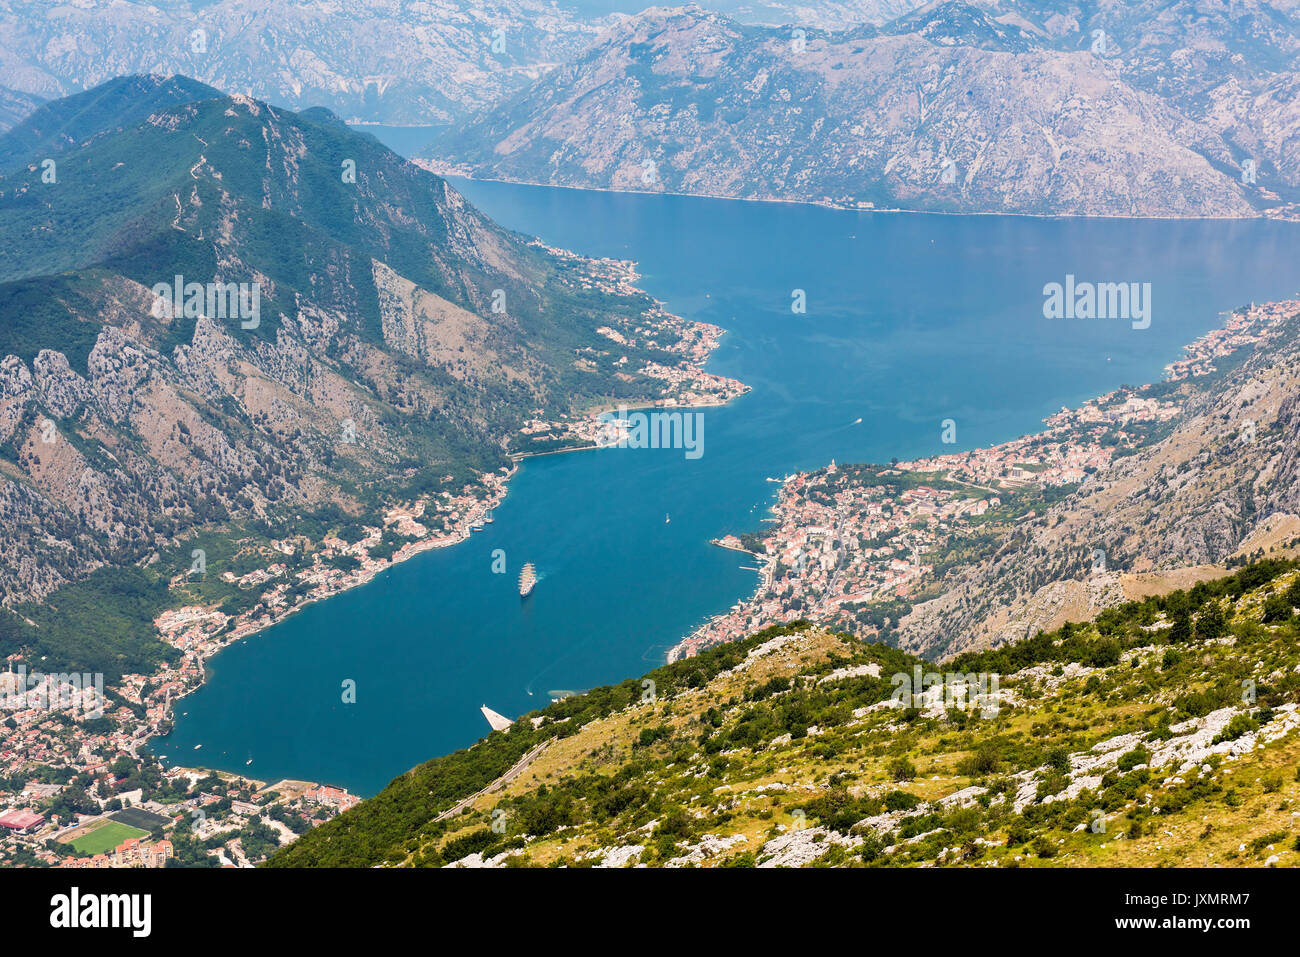 Kotor Bay southwestern Montenegro. The main town seen in the photo is Kotor which is one of the UNESCO’s World Heritage sites Stock Photo